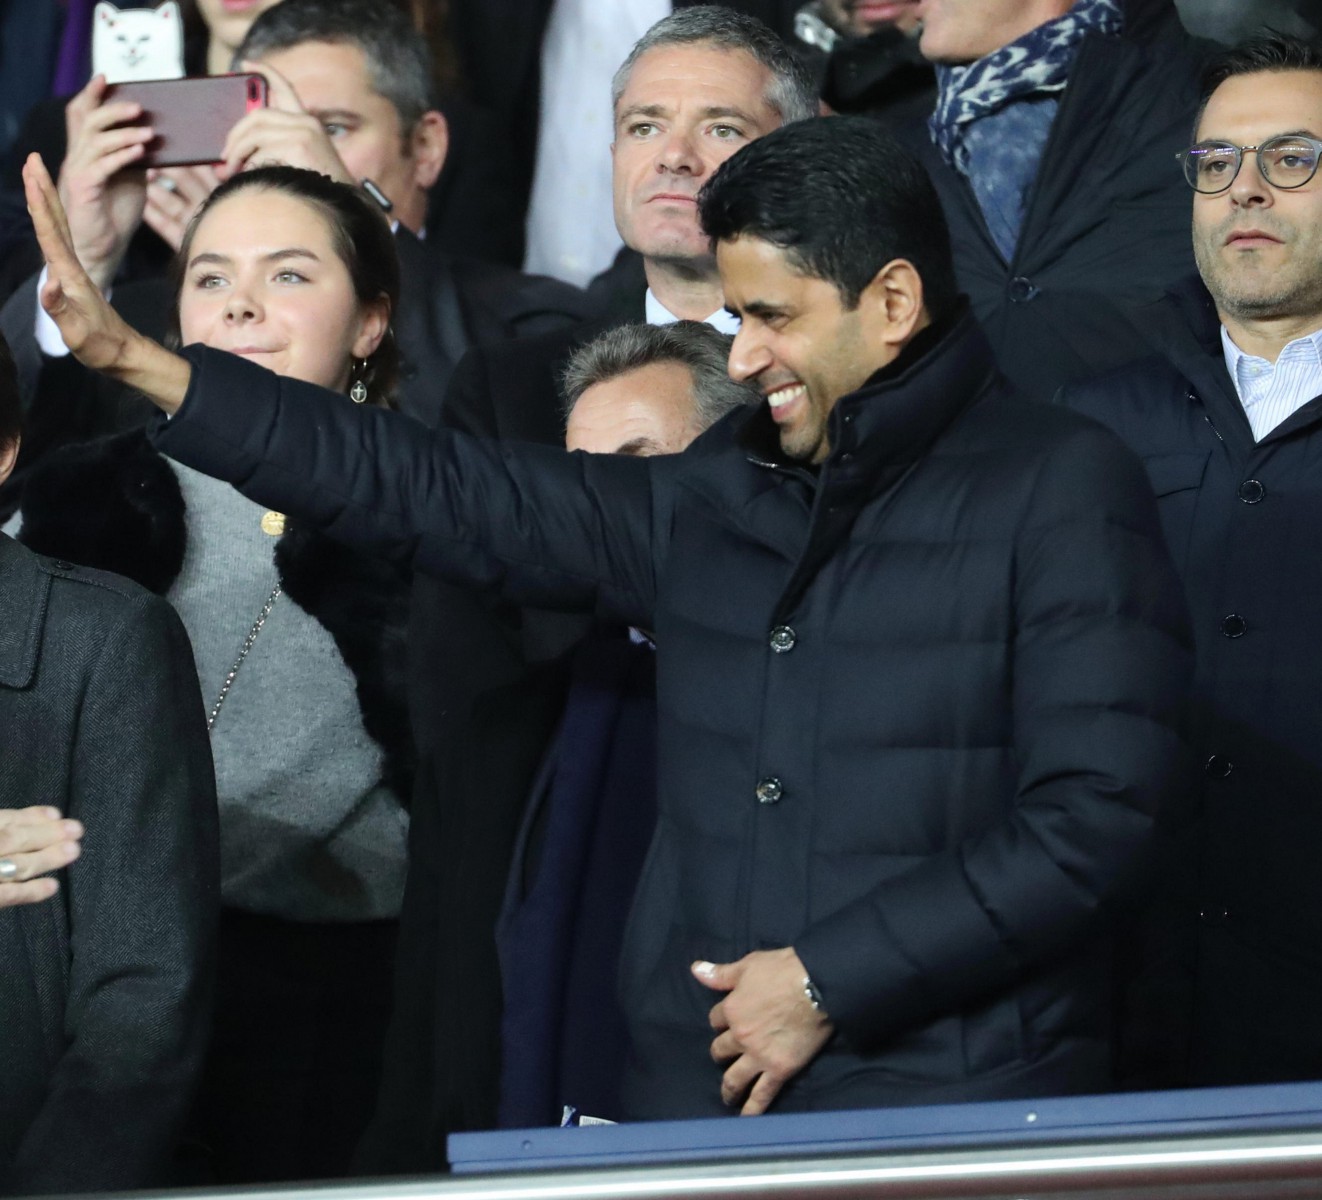 Andrea Radrizzani was seen standing behind PSG owner Nasser Al-Khelaifi at a Champions League match